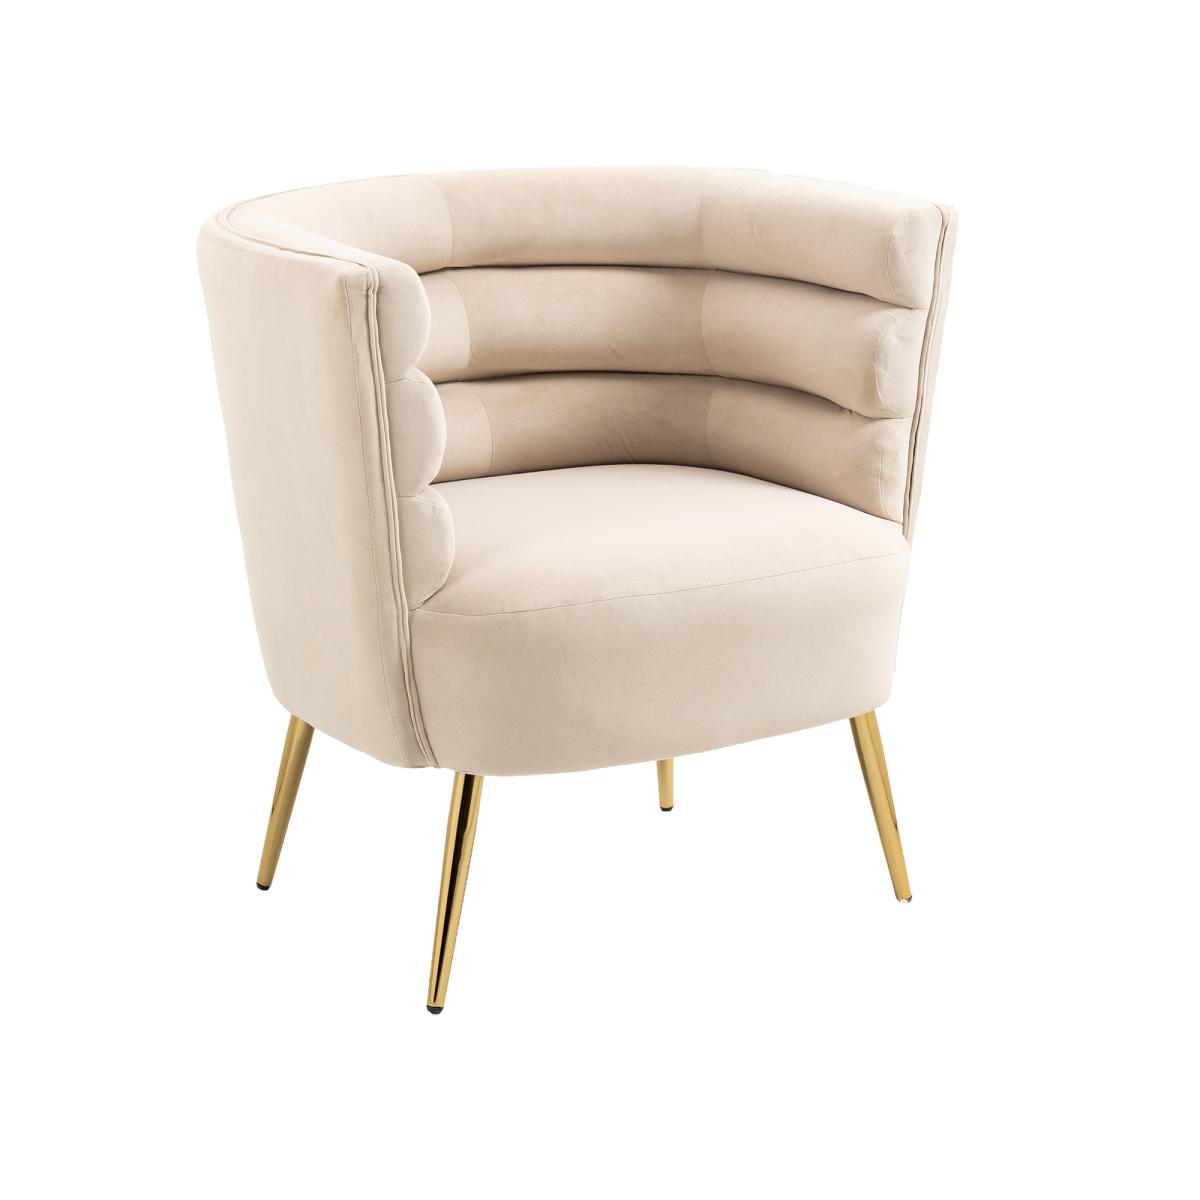 COOLMORE Accent Chair ,leisure single chair with Golden feet